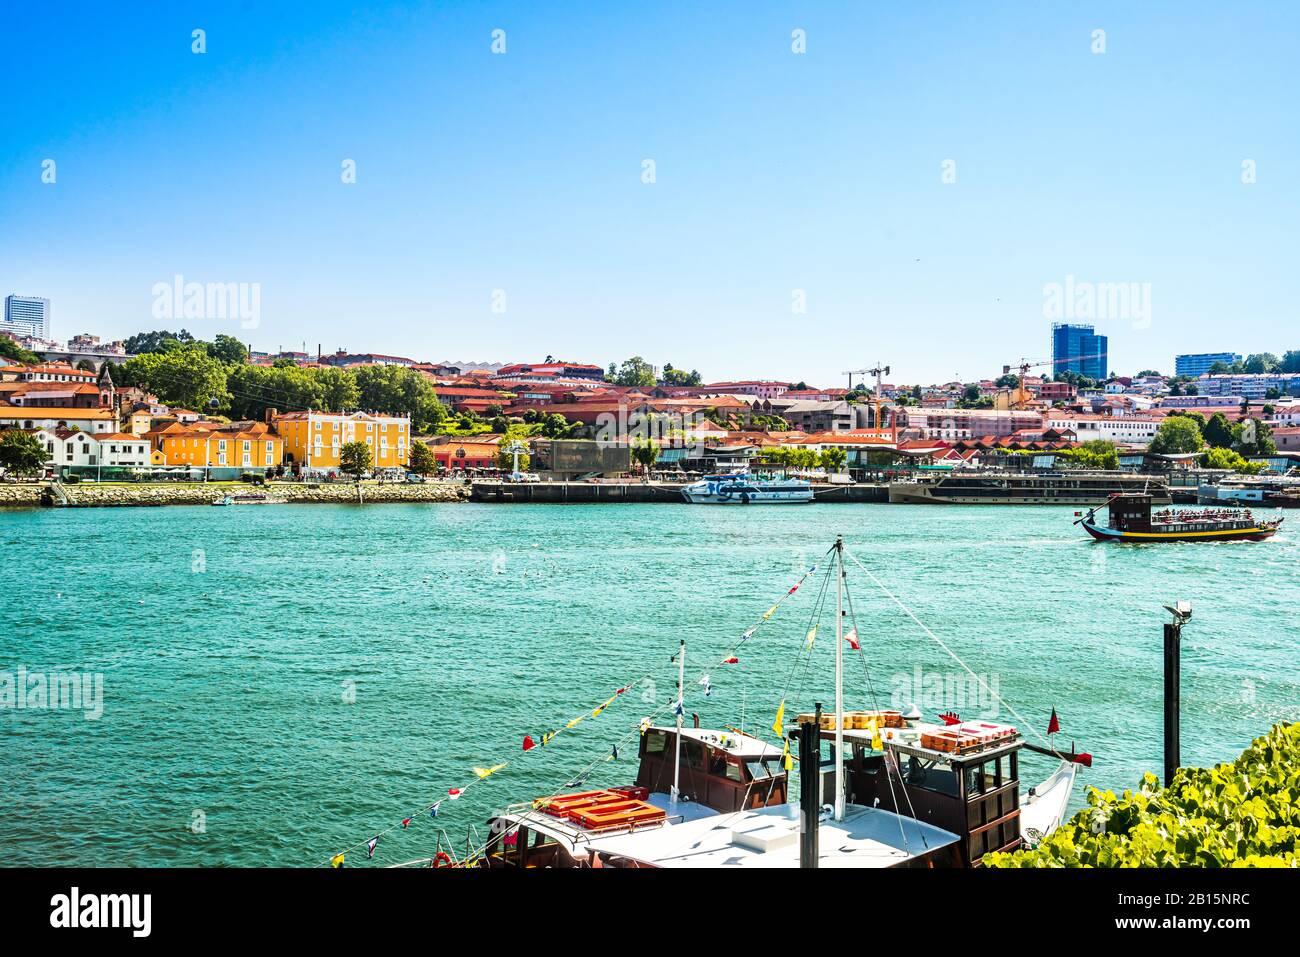 View on Pier at Douro valley in Oporto, Portugal Stock Photo